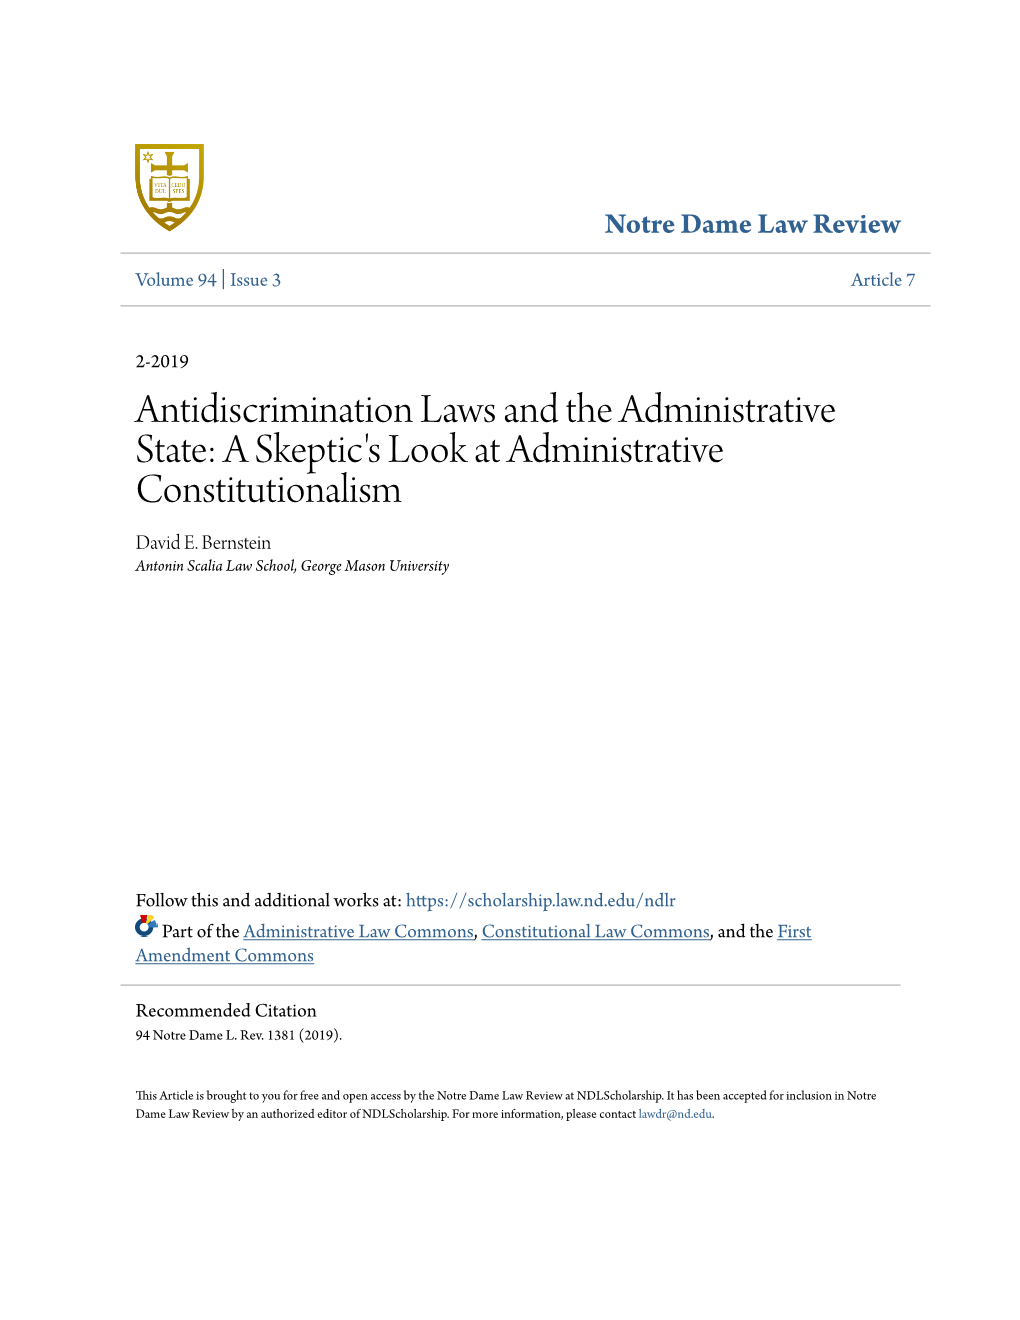 Antidiscrimination Laws and the Administrative State: a Skeptic's Look at Administrative Constitutionalism David E